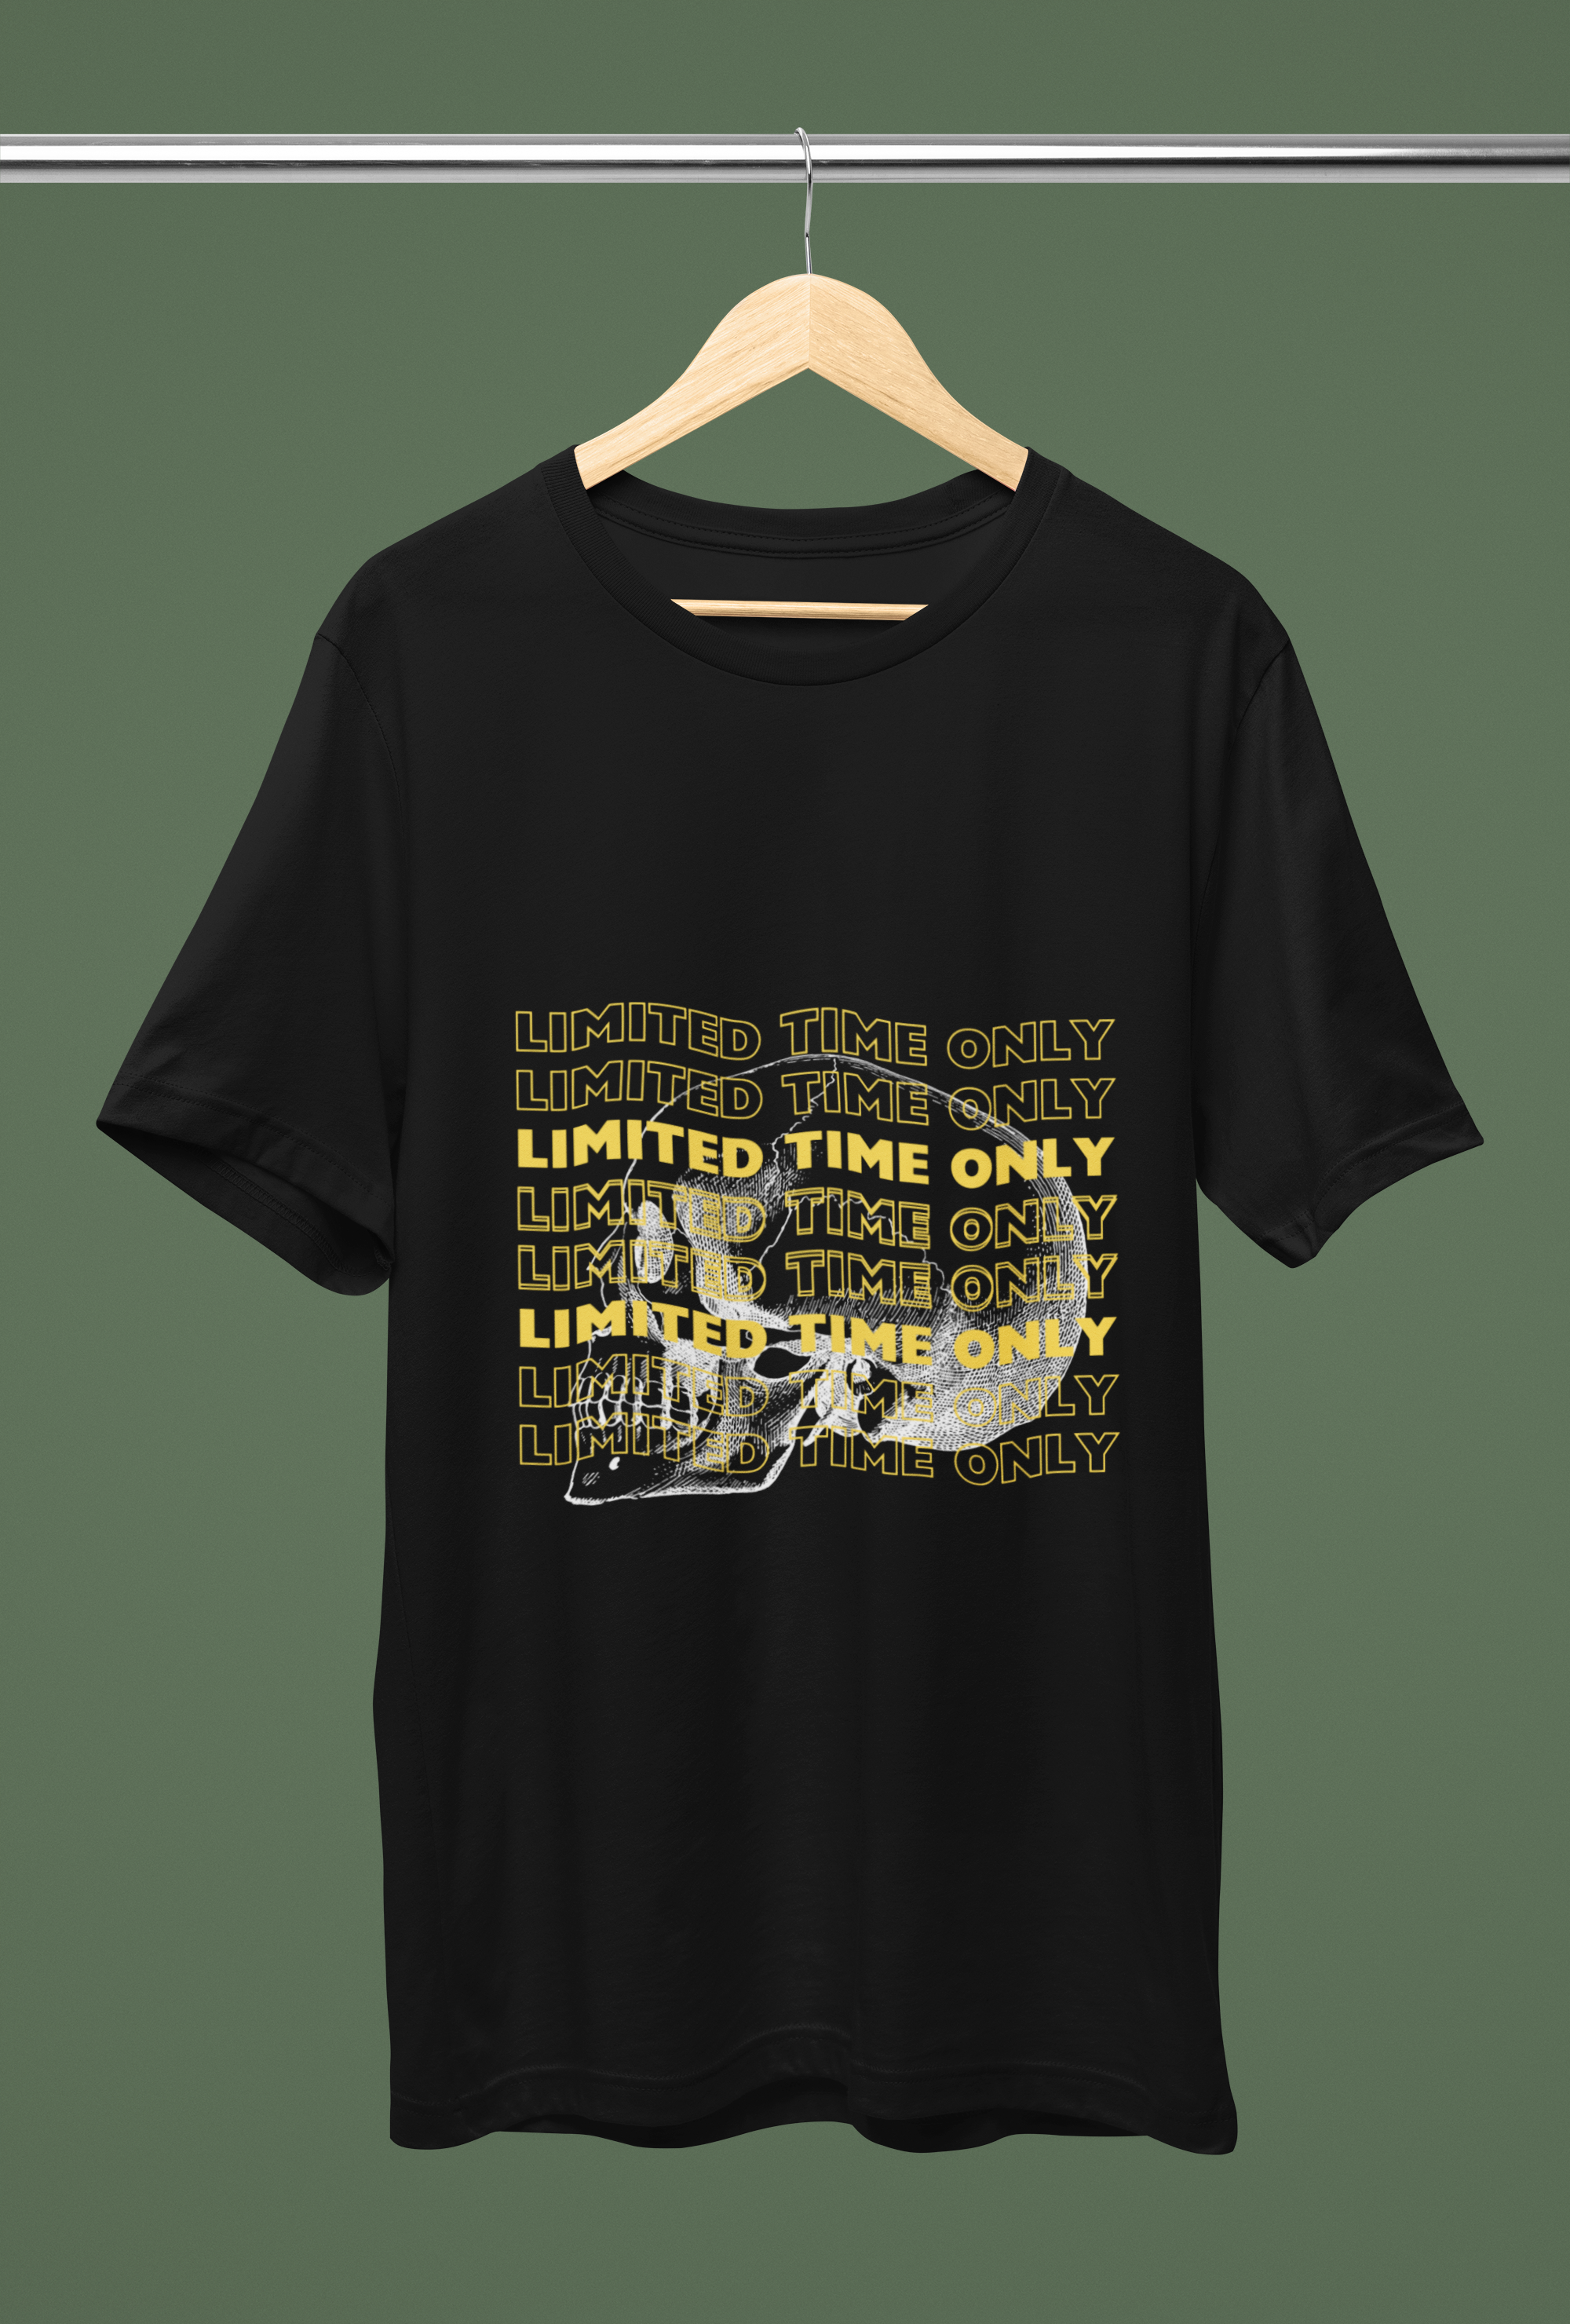 Strike a statement with this limited-edition black tee.  Featuring bold yellow text and a striking skull graphic below, this drop-shoulder t-shirt is a unique addition to any wardrobe. Made from soft and comfortable fabric, it's perfect for everyday wear.  But hurry, this design won't last forever